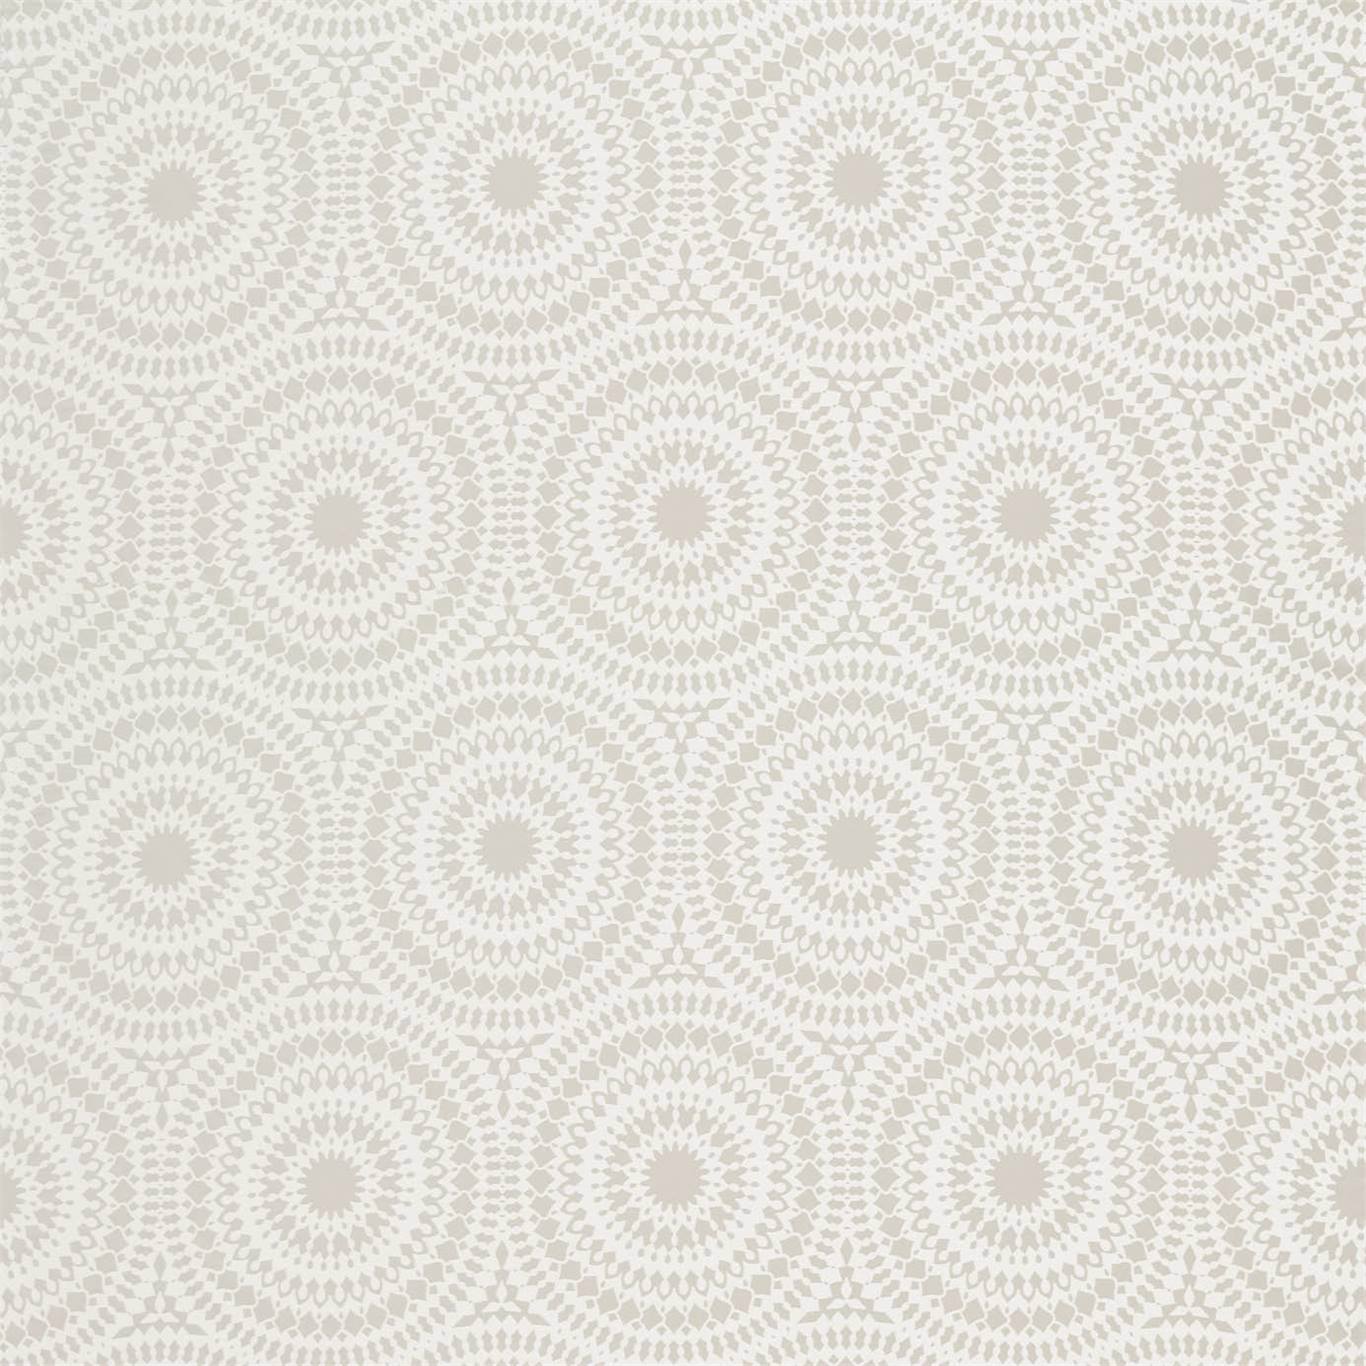 Cadencia Fabric by Harlequin - HPUT132656 - Linen